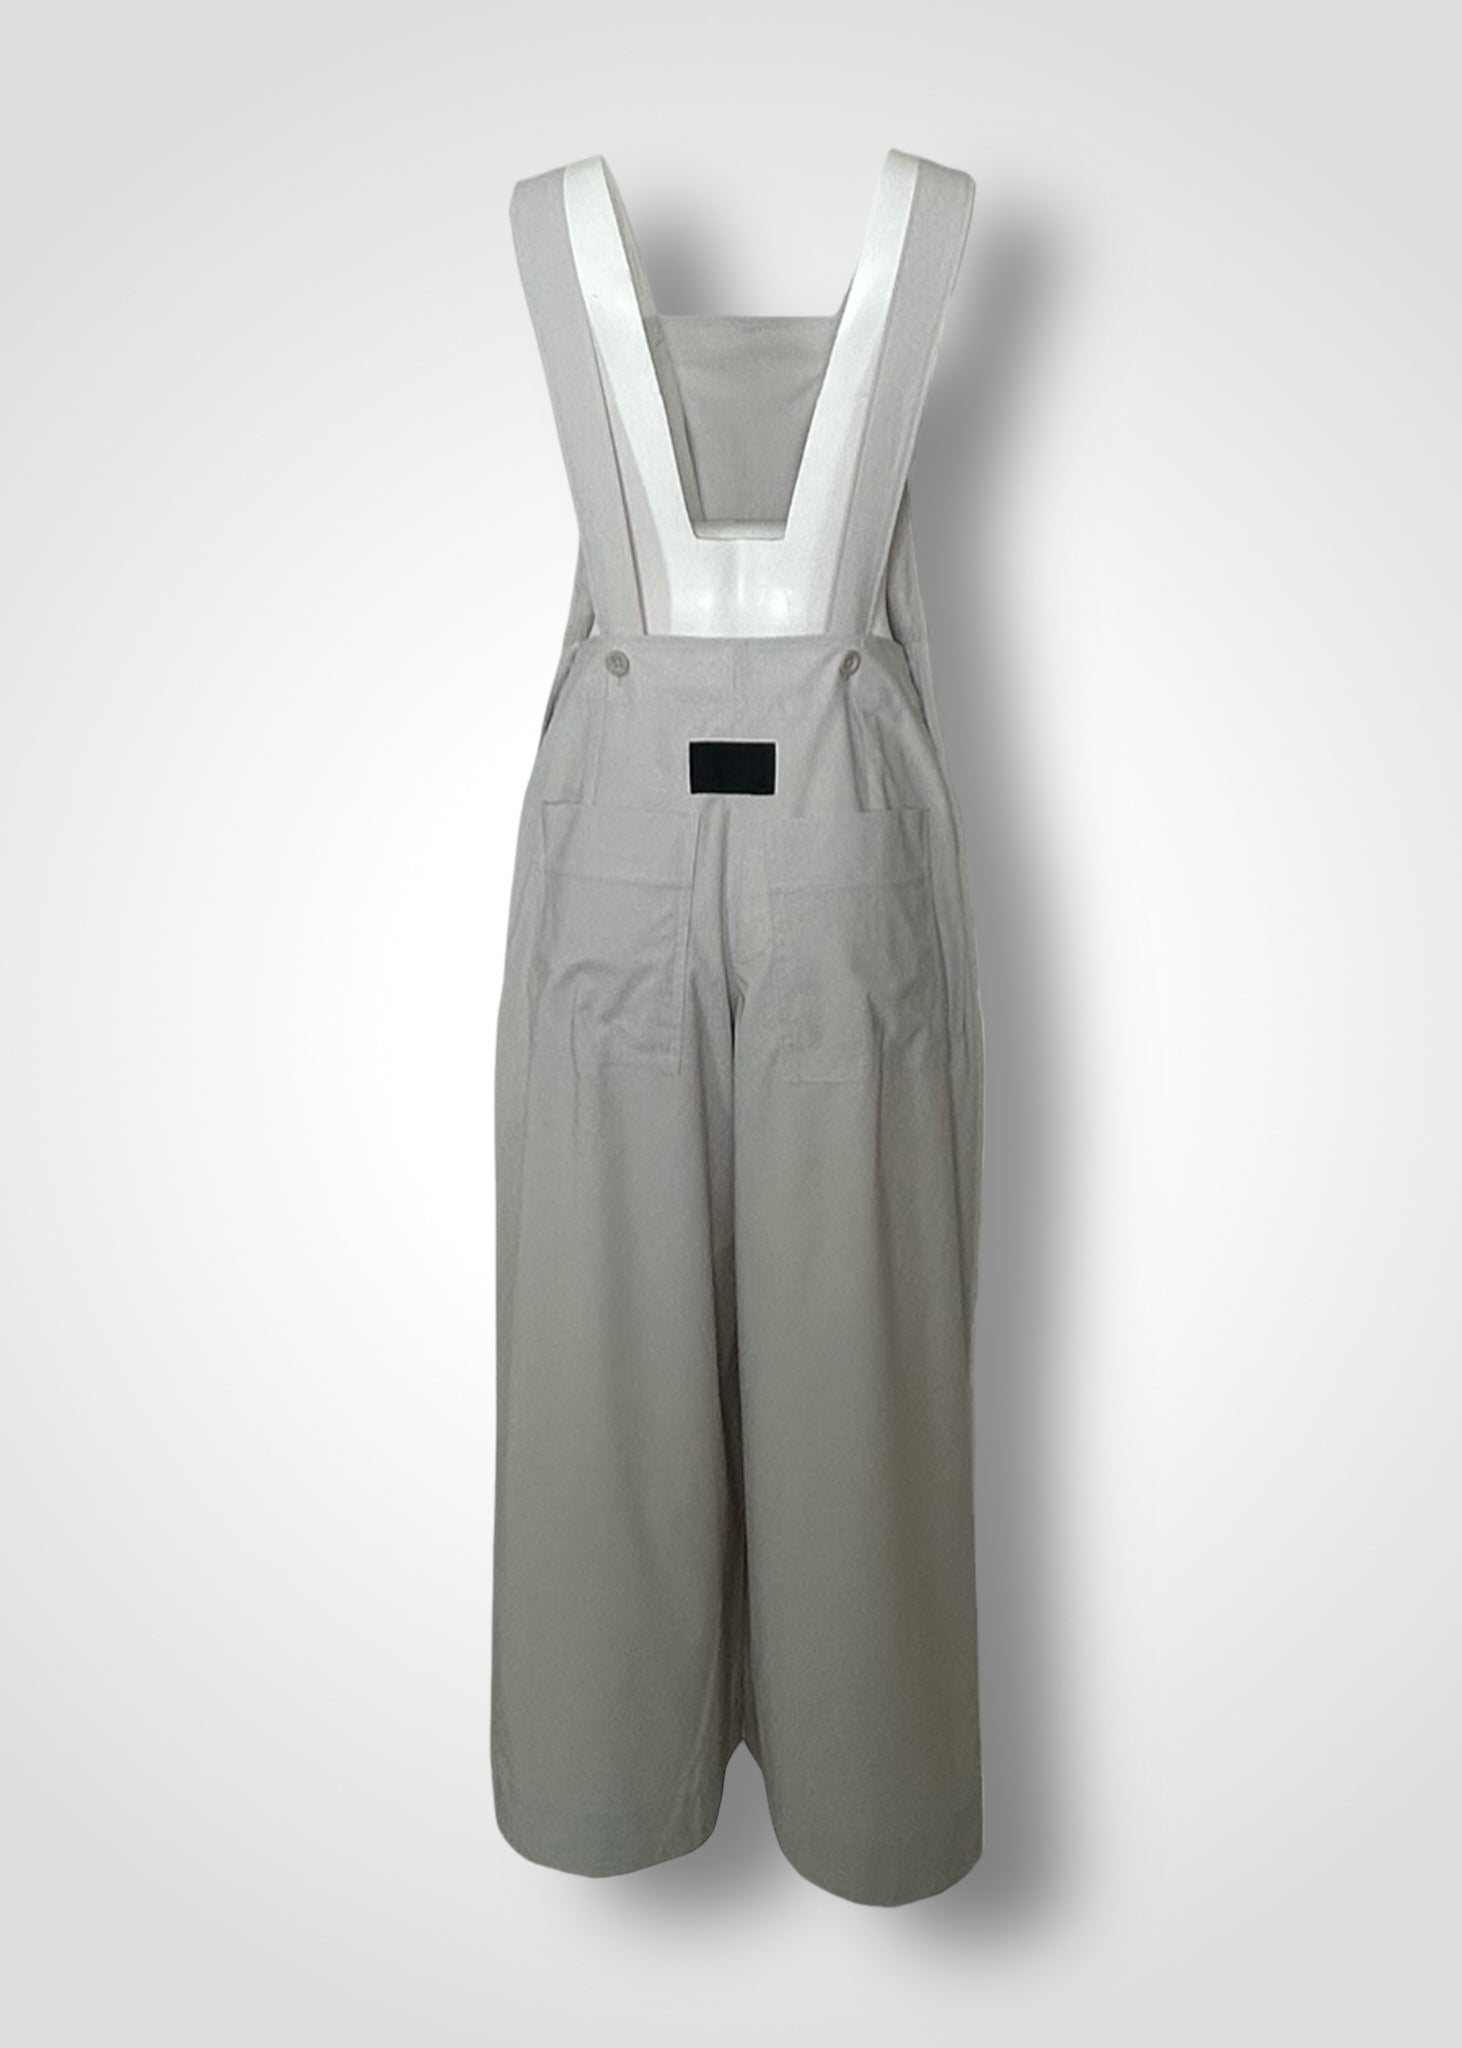 09 JULIET OVERALLS / COMPACT SATIN TRICOT - C10